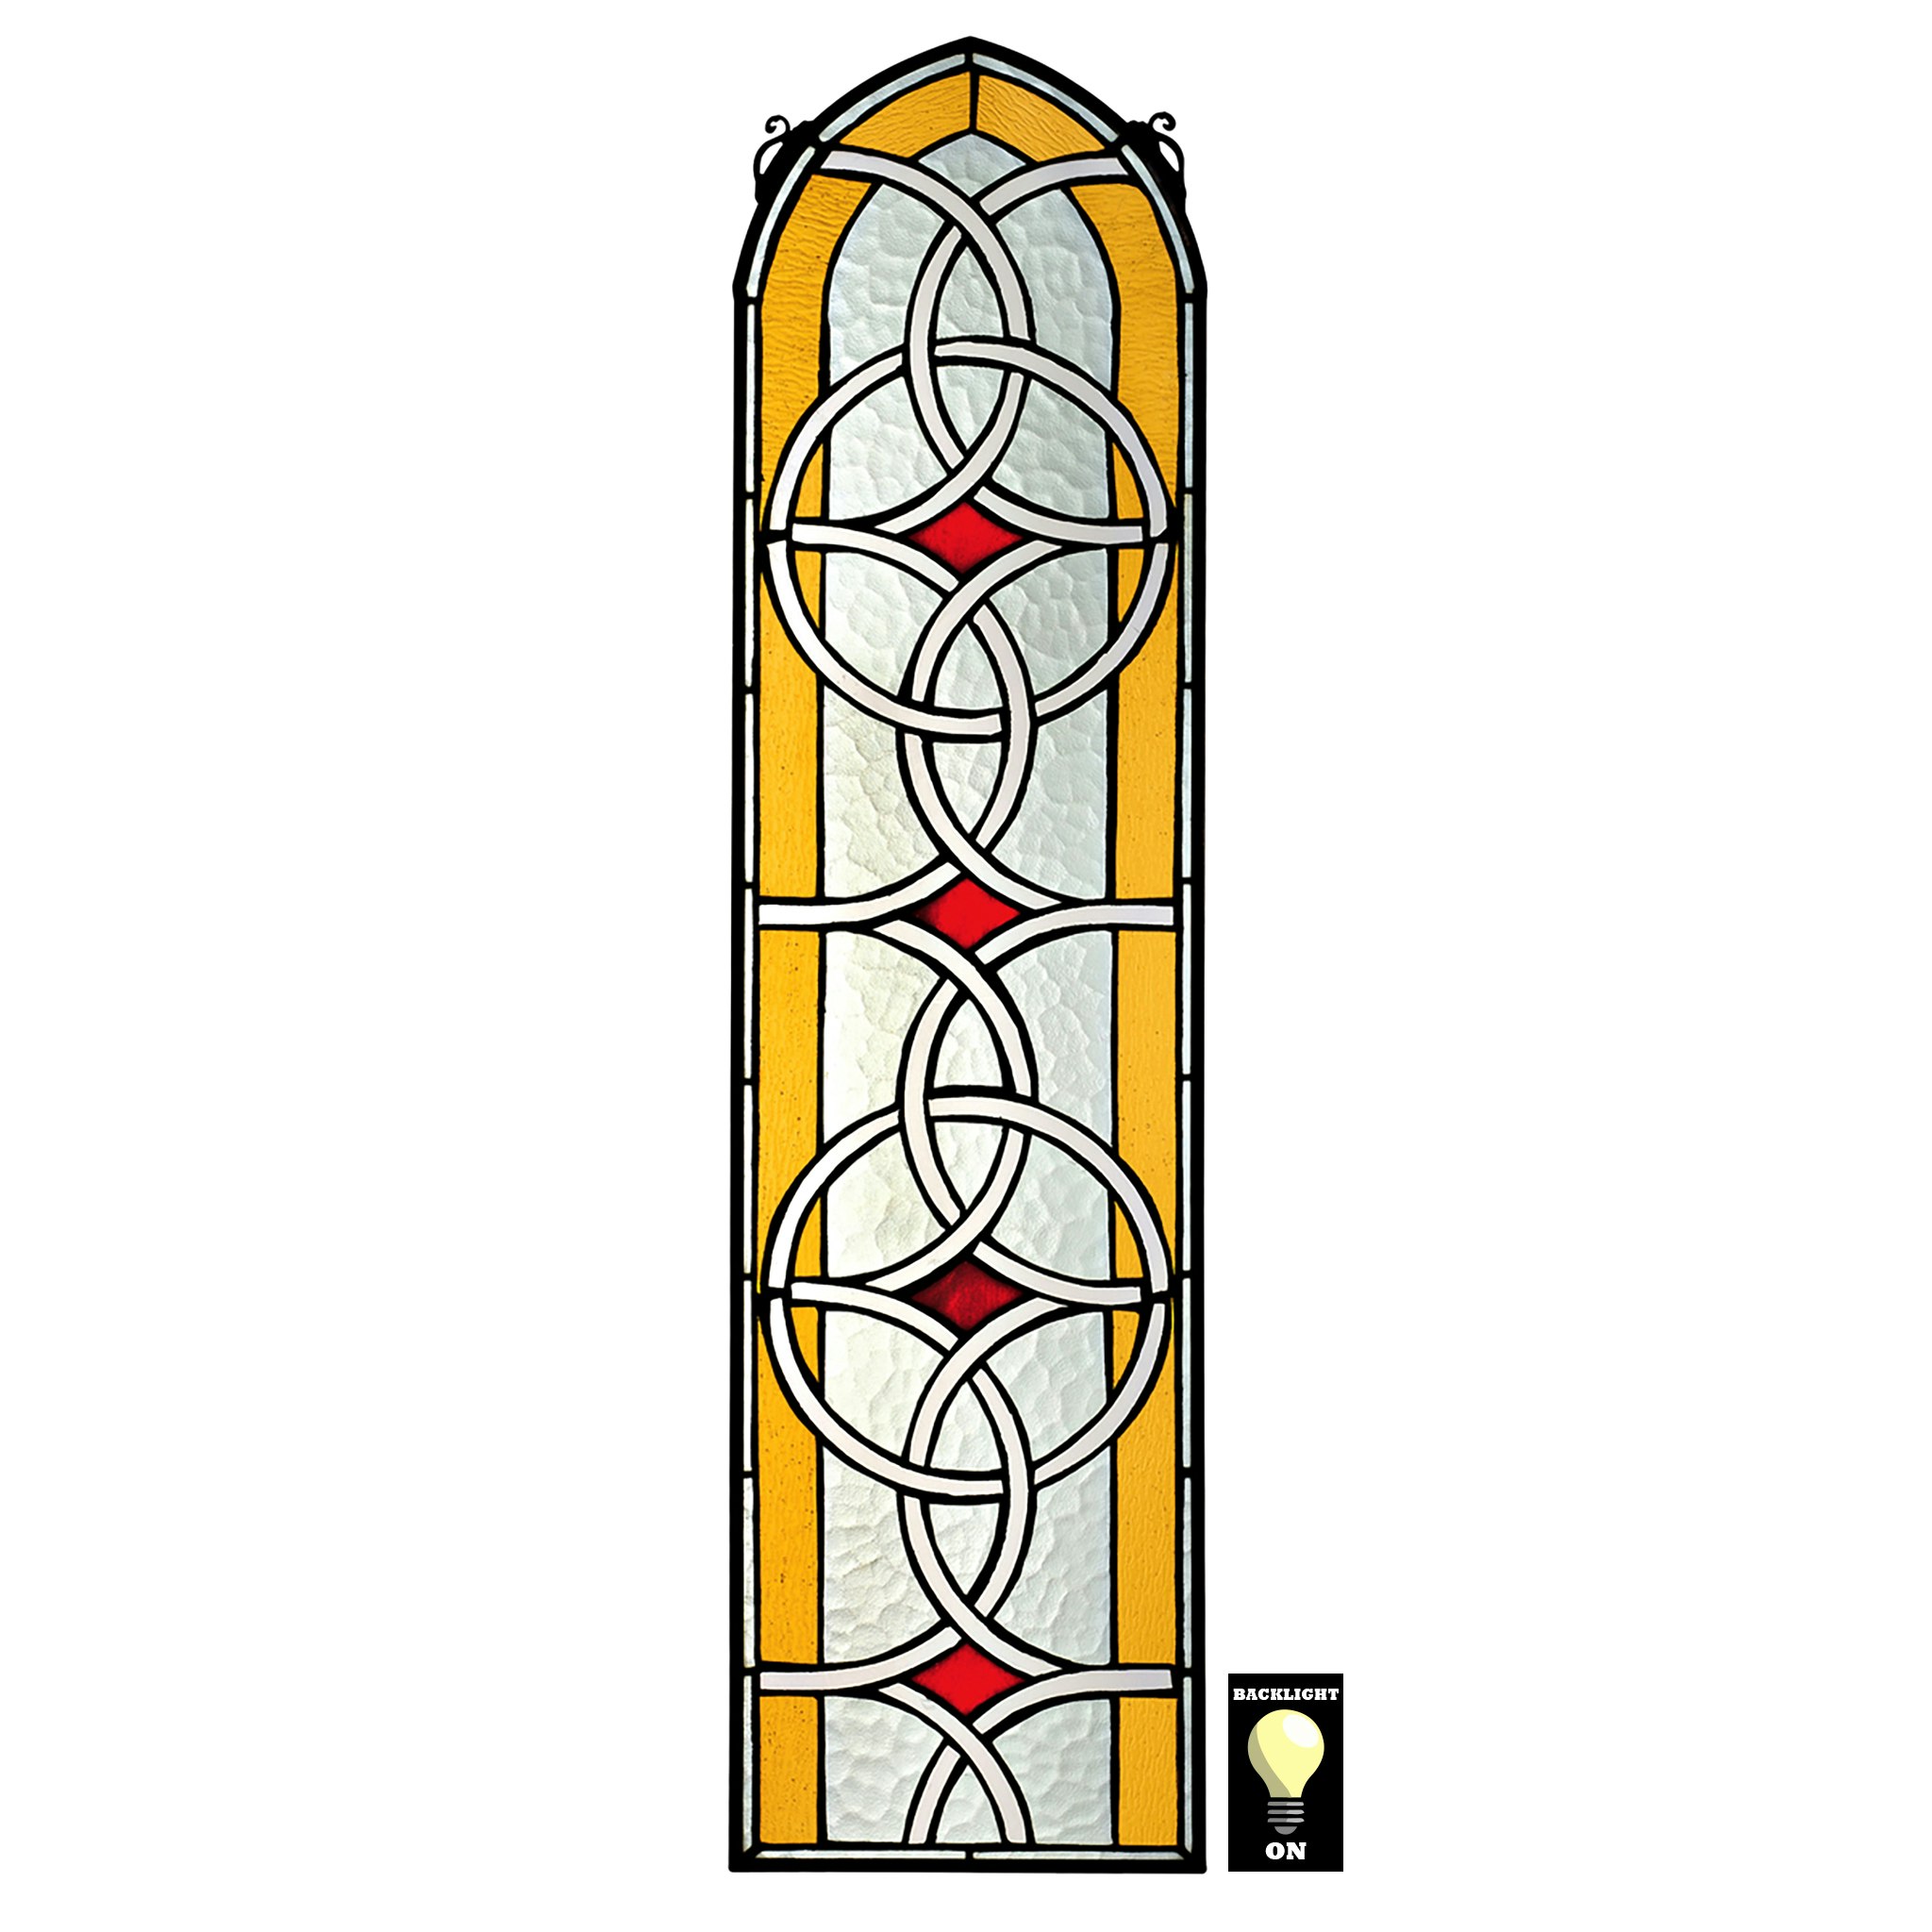 Celtic Knotwork Stained Glass Window            Nr